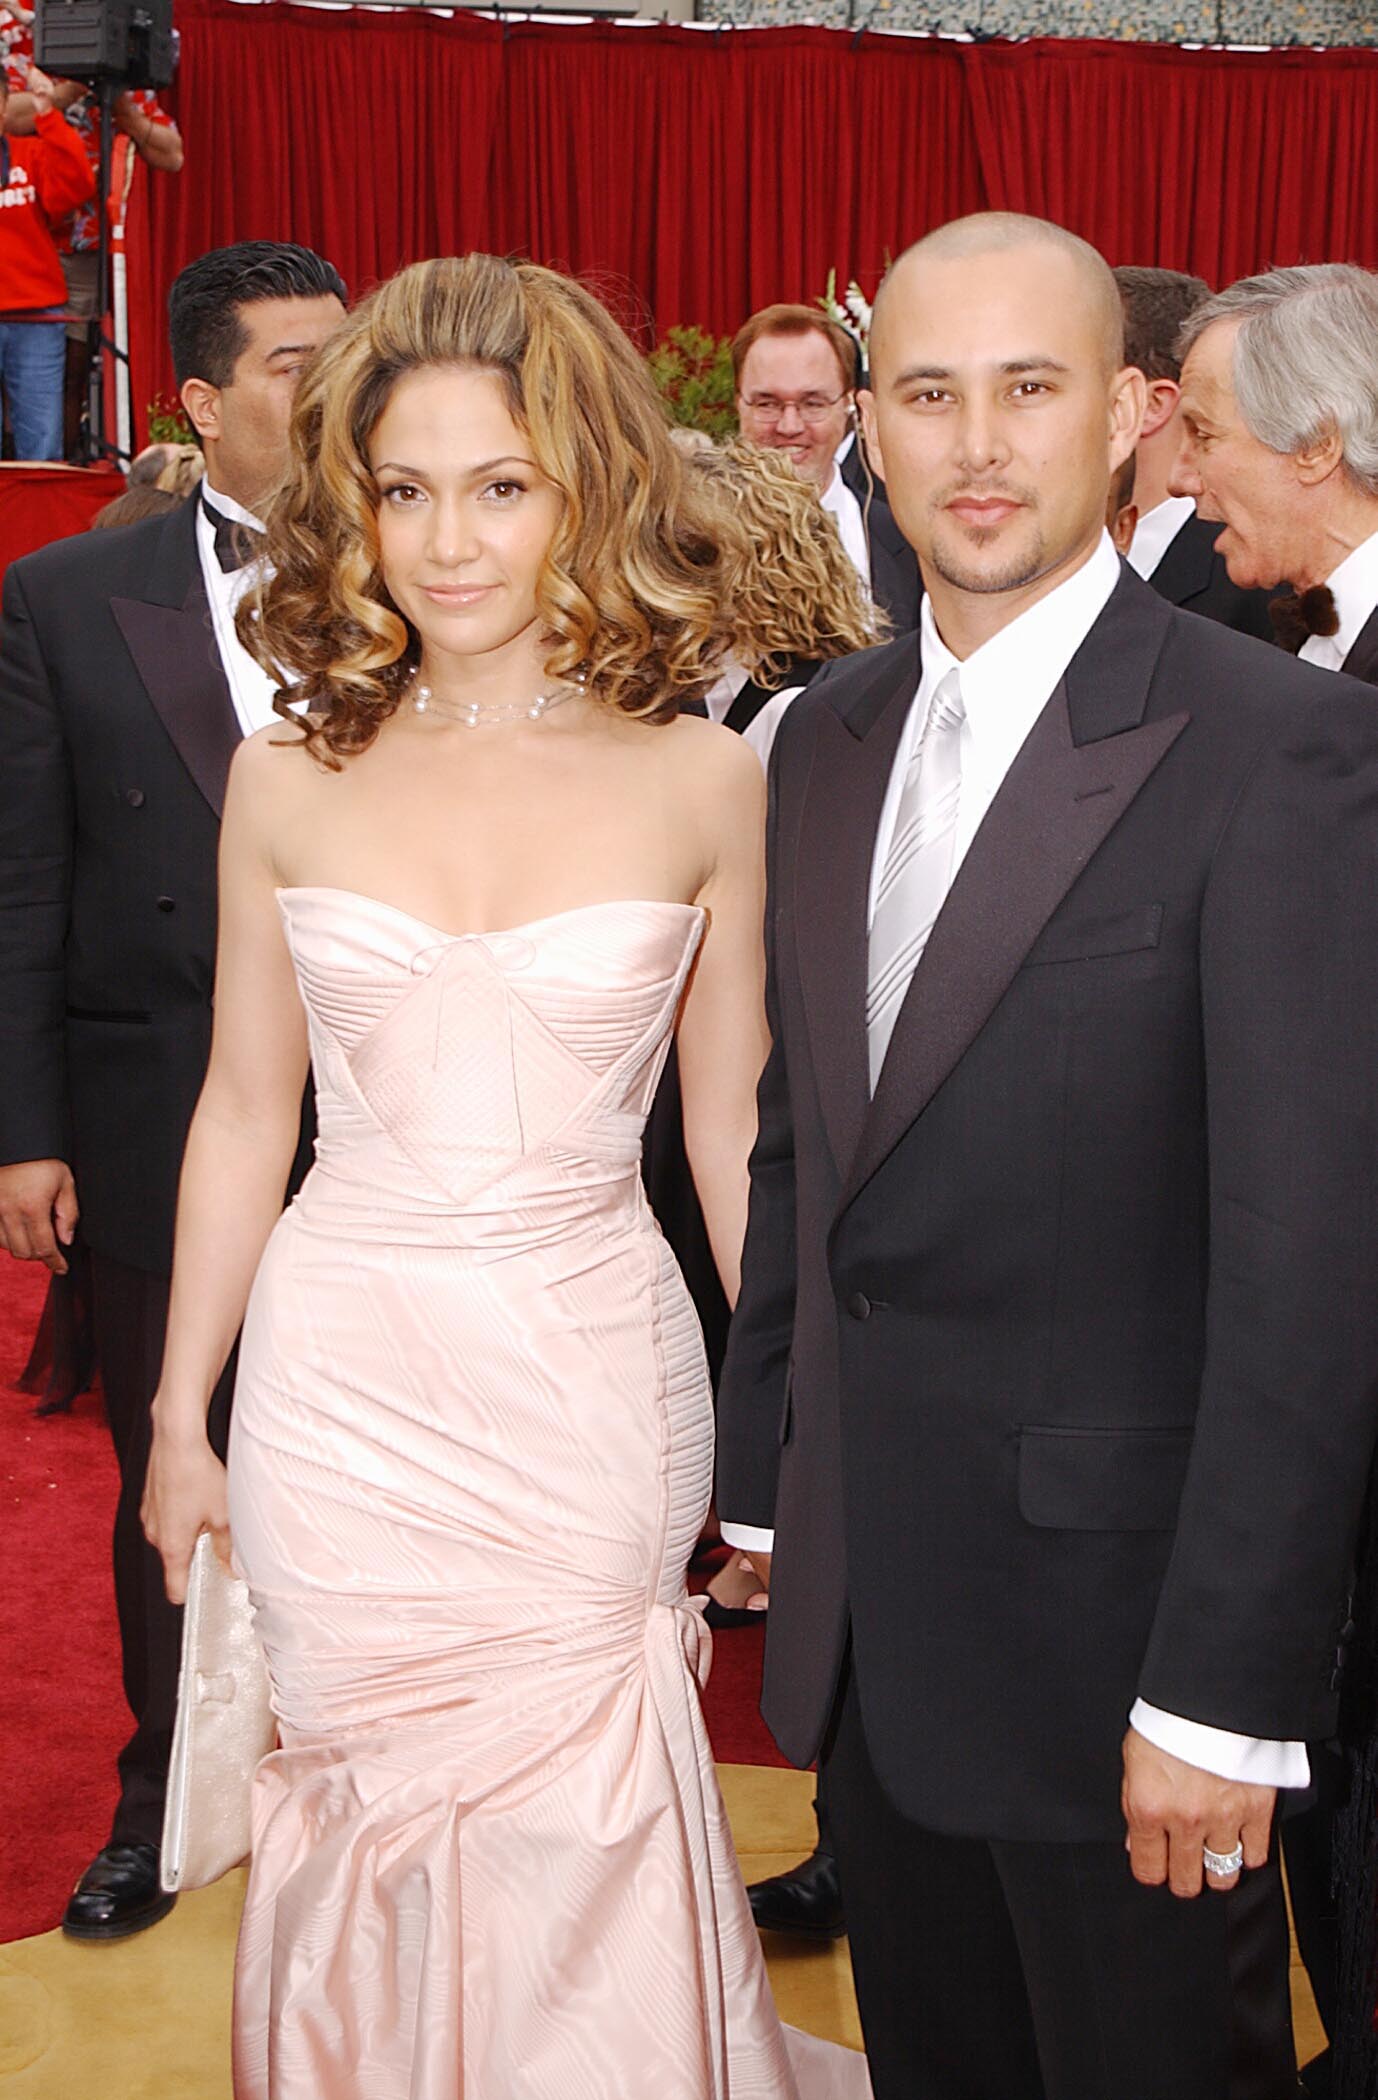 Jennifer Lopez and Cris Judd at the Kodak Theatre in Hollywood, California for the Annual Academy Awards in 2002 | Source: Getty Images